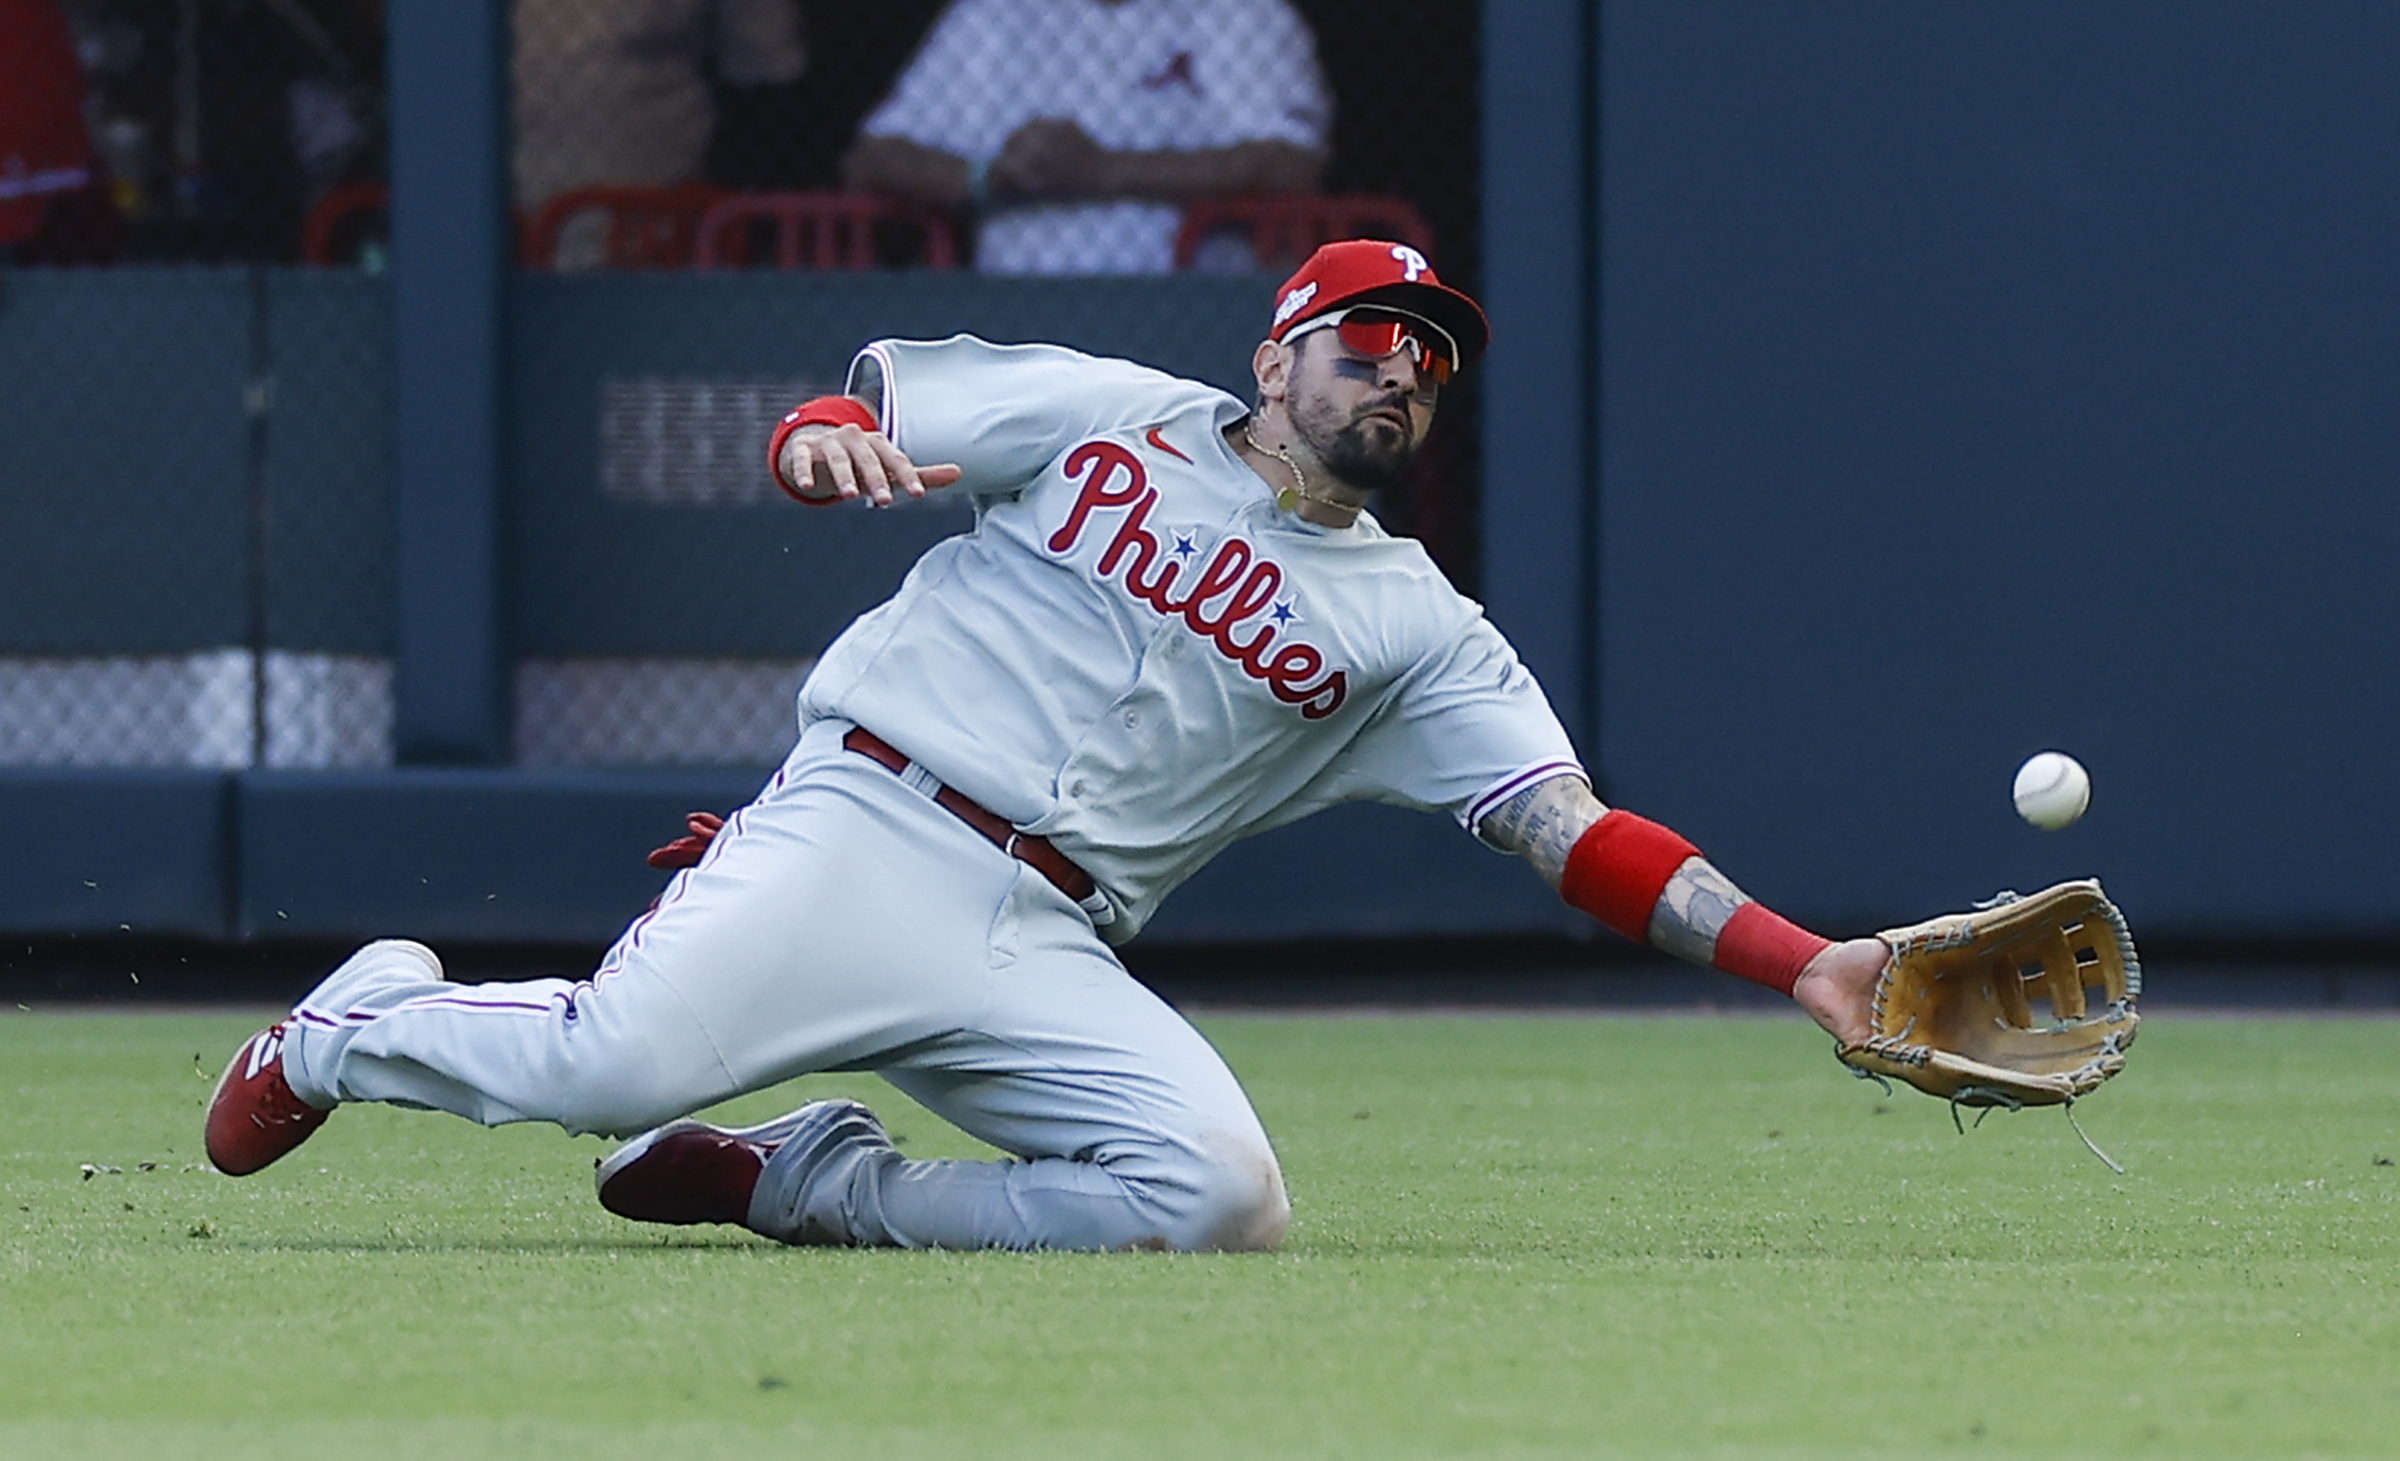 Castellanos hits 2 homers again, powers Phillies past Braves 3-1